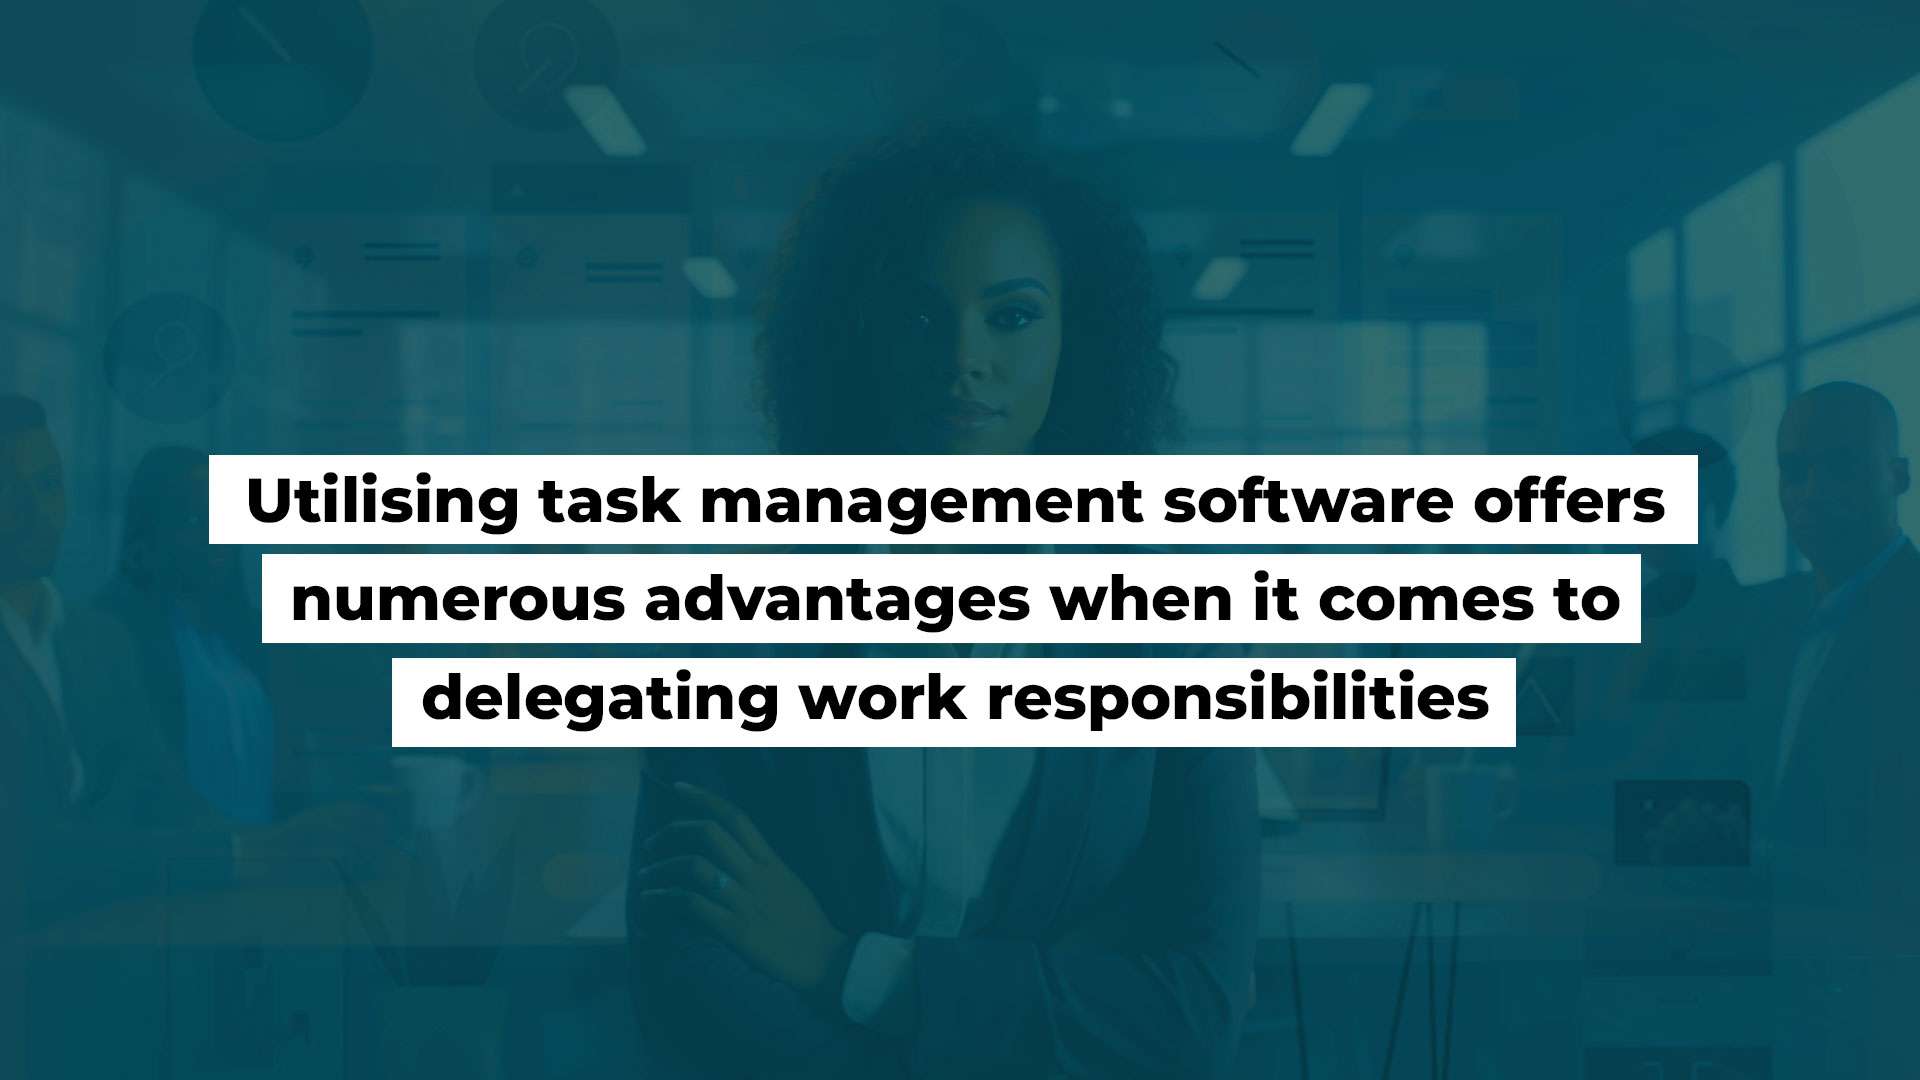 Utilising task management software offers numerous advantages when it comes to delegating work responsibilities